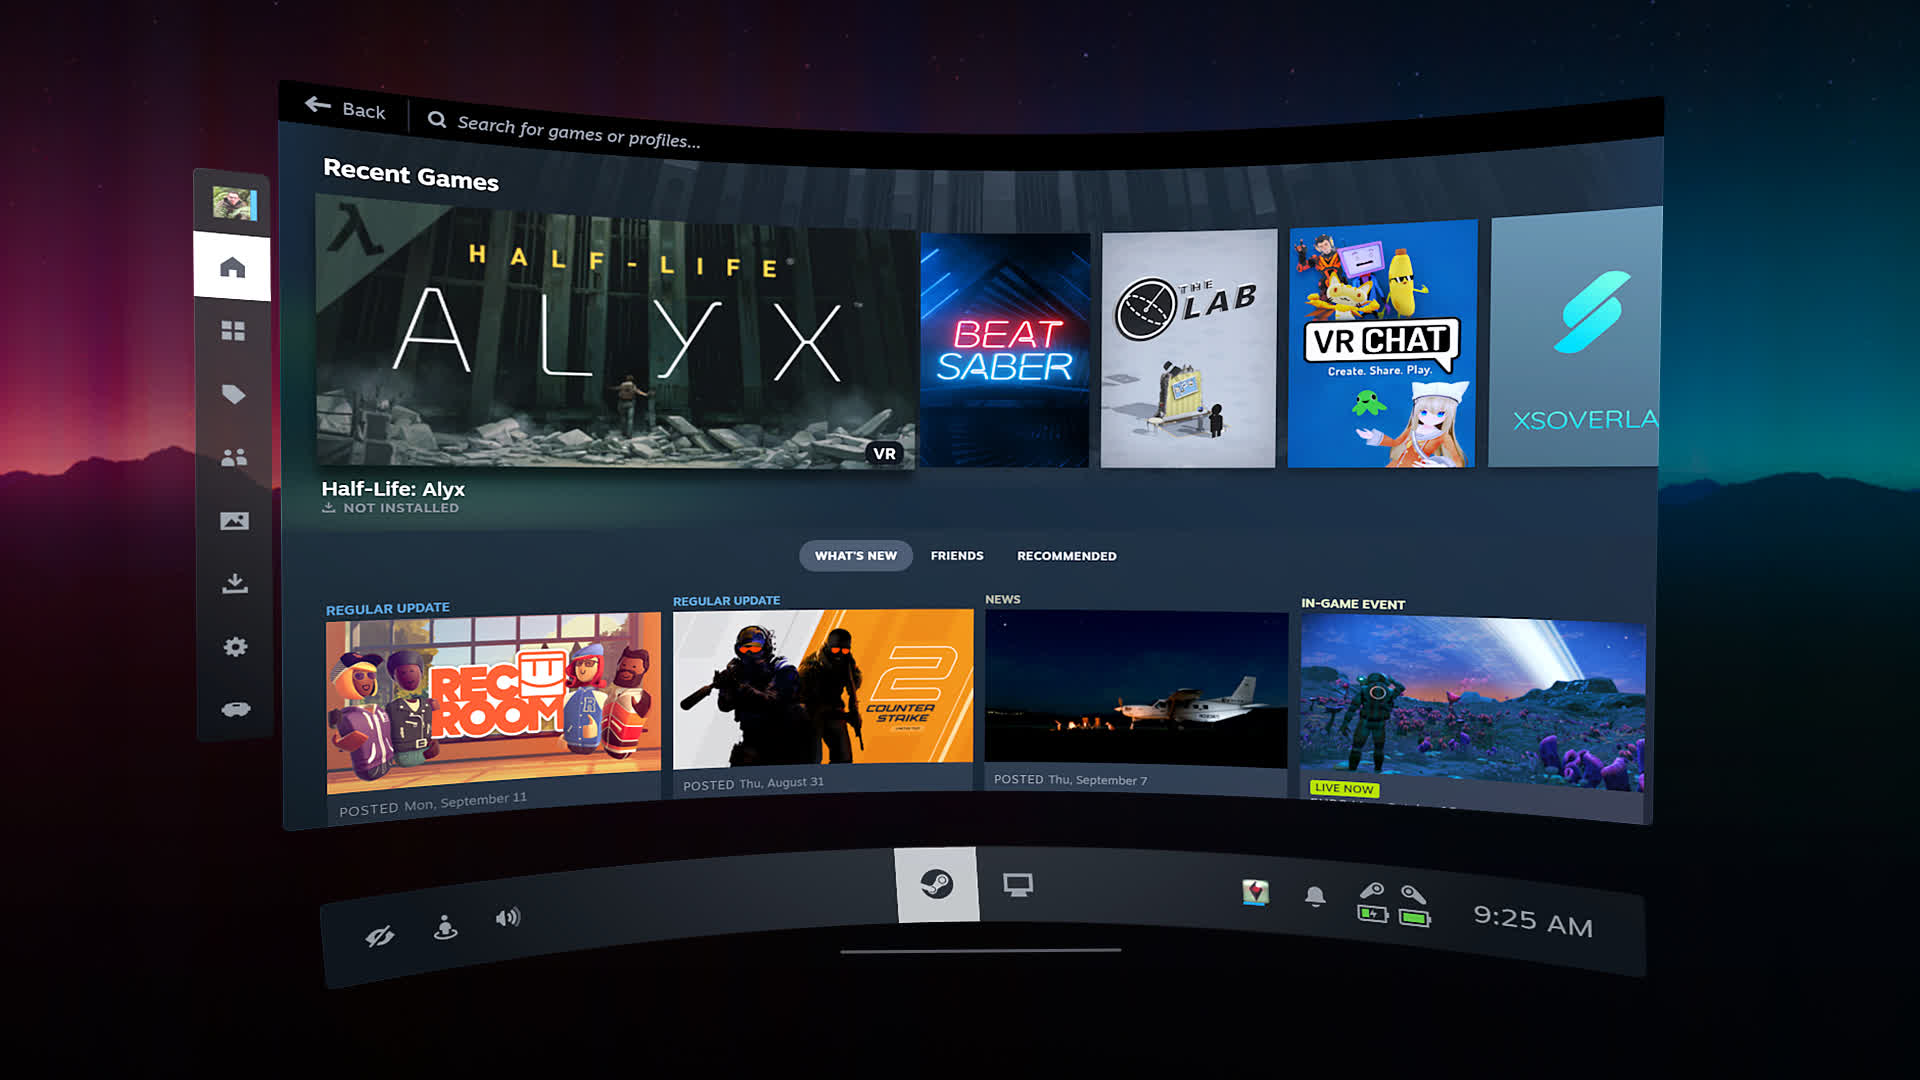 SteamVR 2.0 released in beta form, reaffirming Valve's commitment to VR